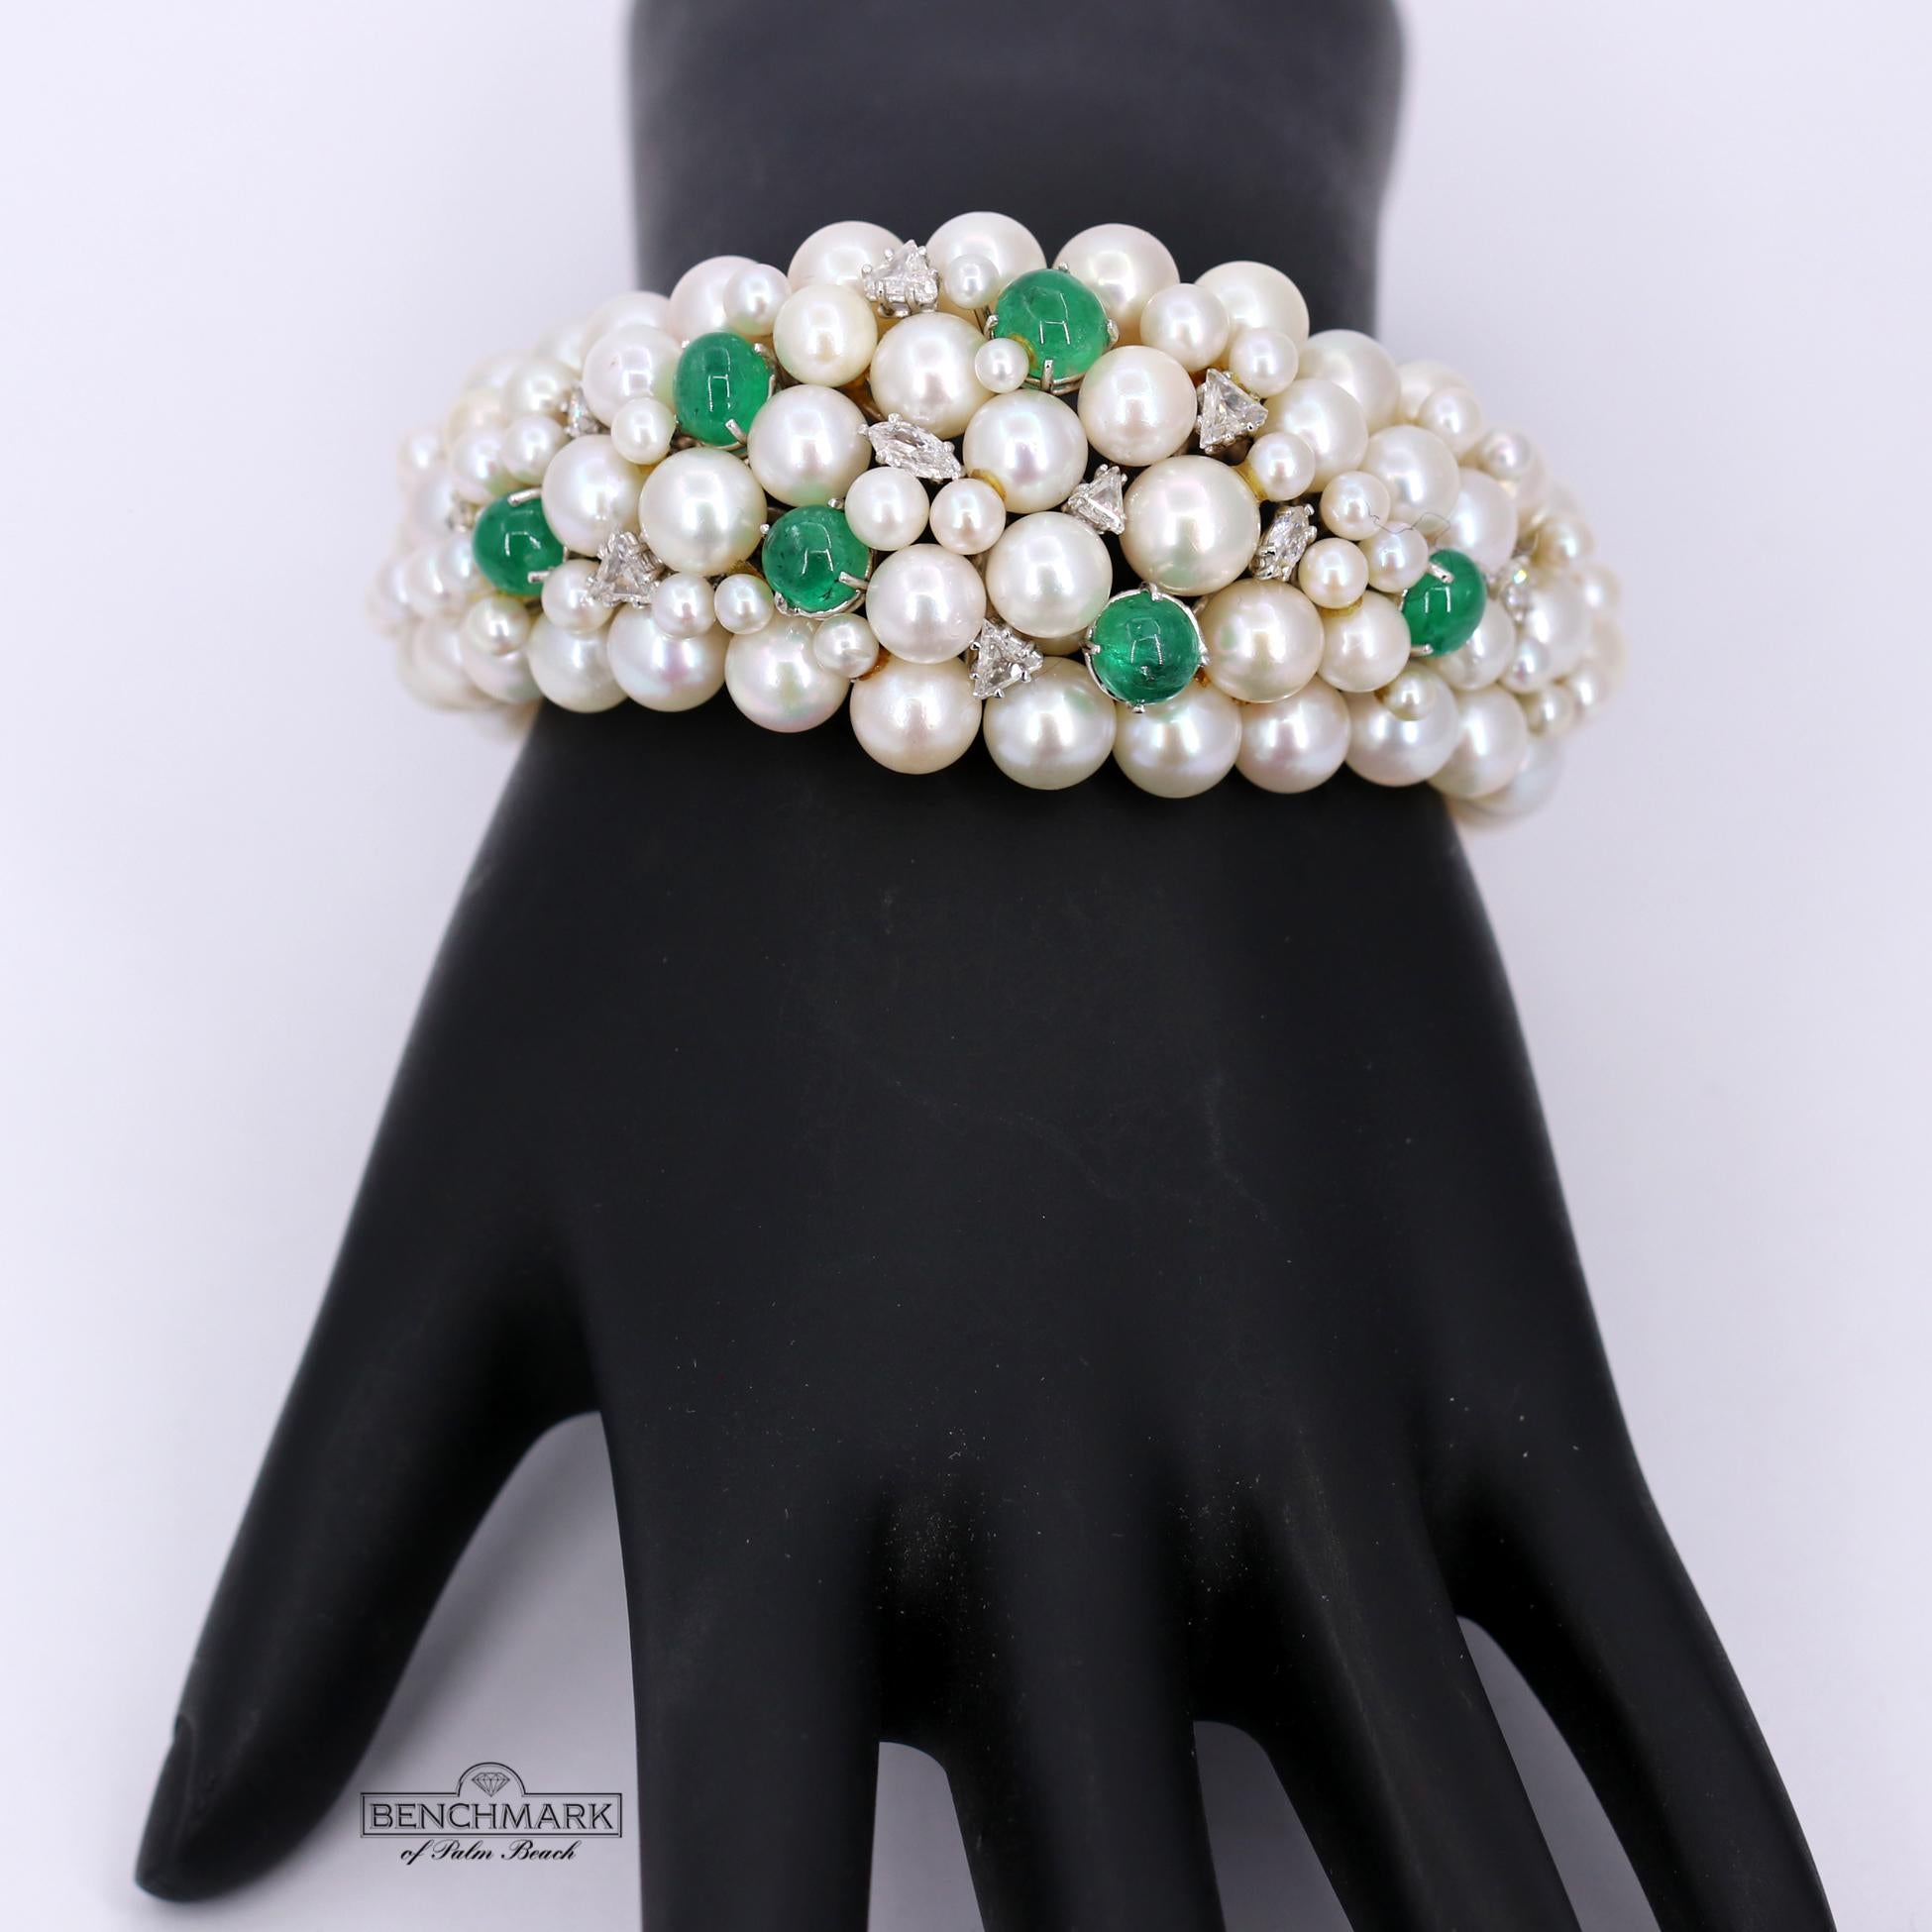 Women's Midcentury White Gold Bracelet with Diamonds Emeralds and Pearls